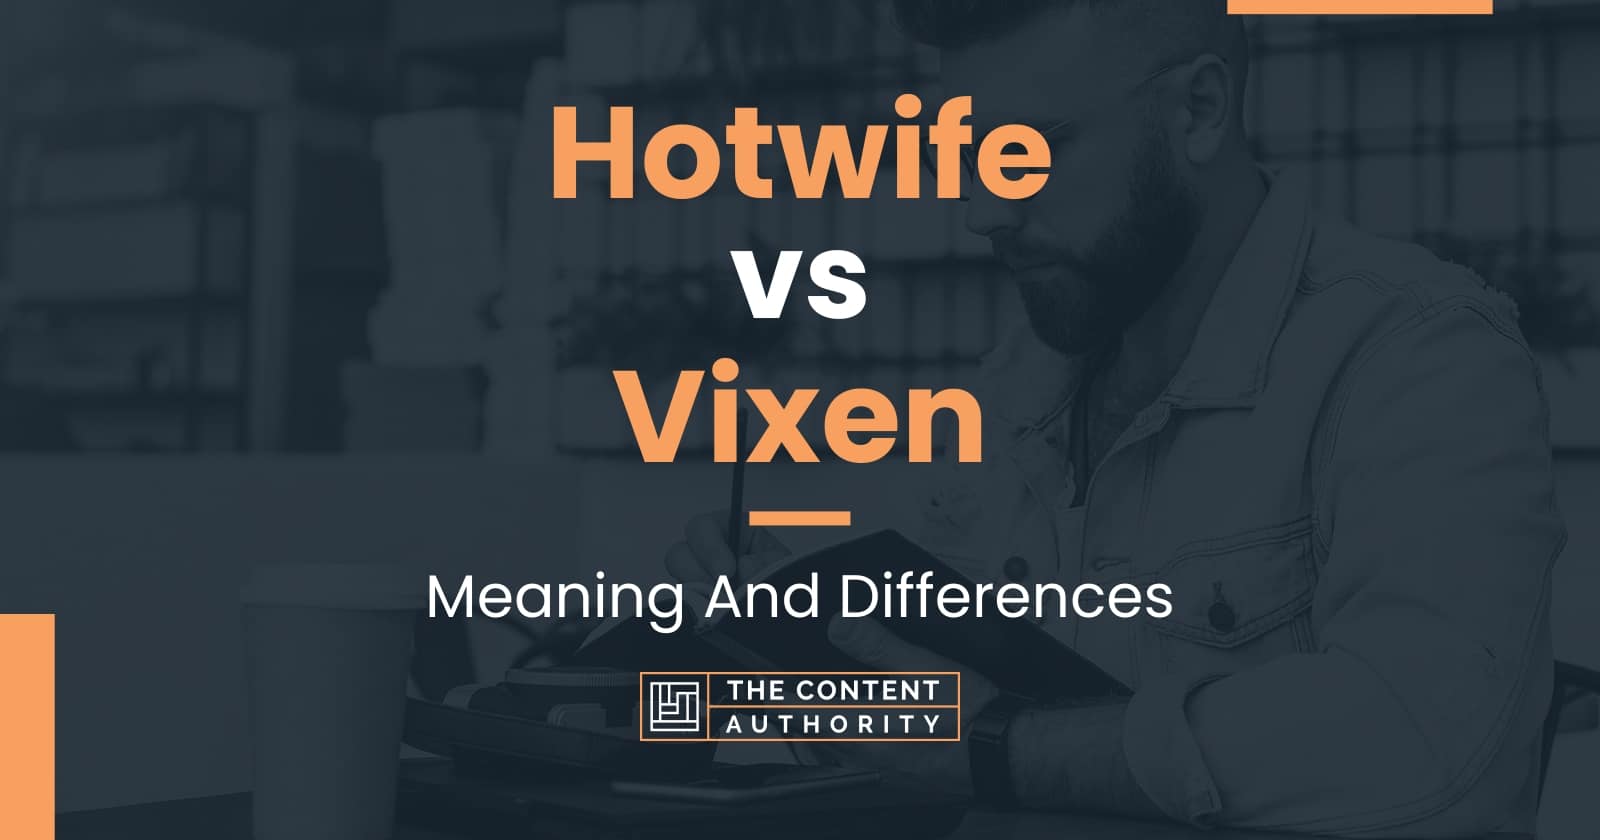 Hotwife vs Vixen Meaning And Differences